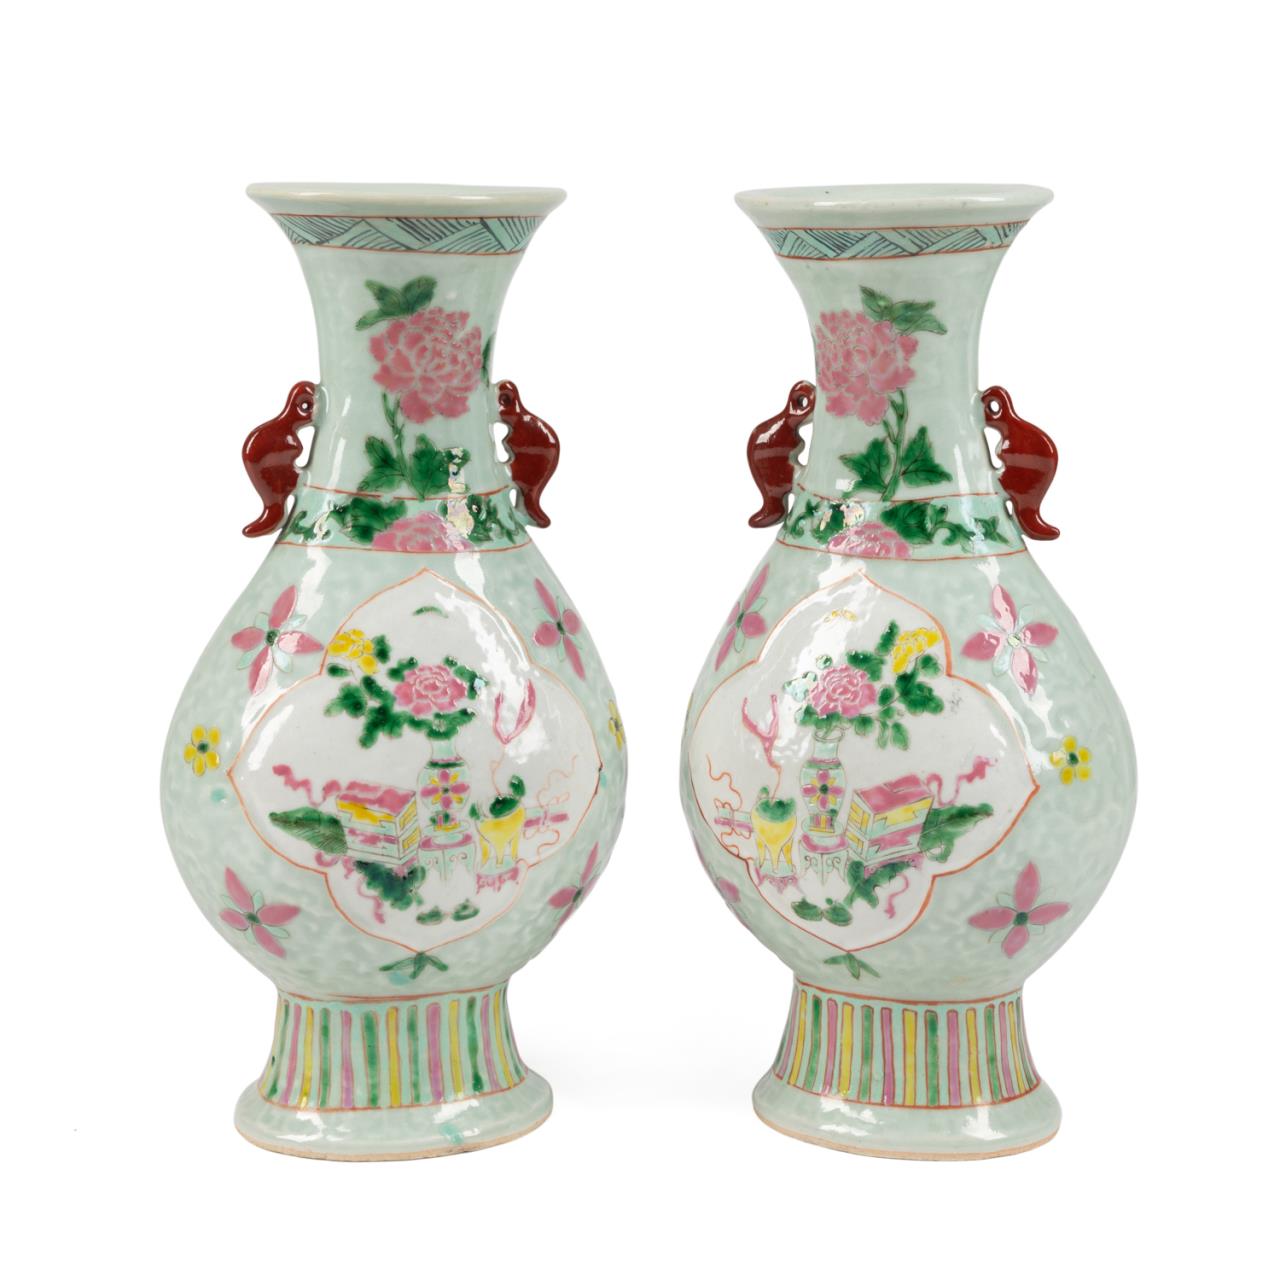 PAIR CHINESE FAMILLE ROSE VASES 2f9b66